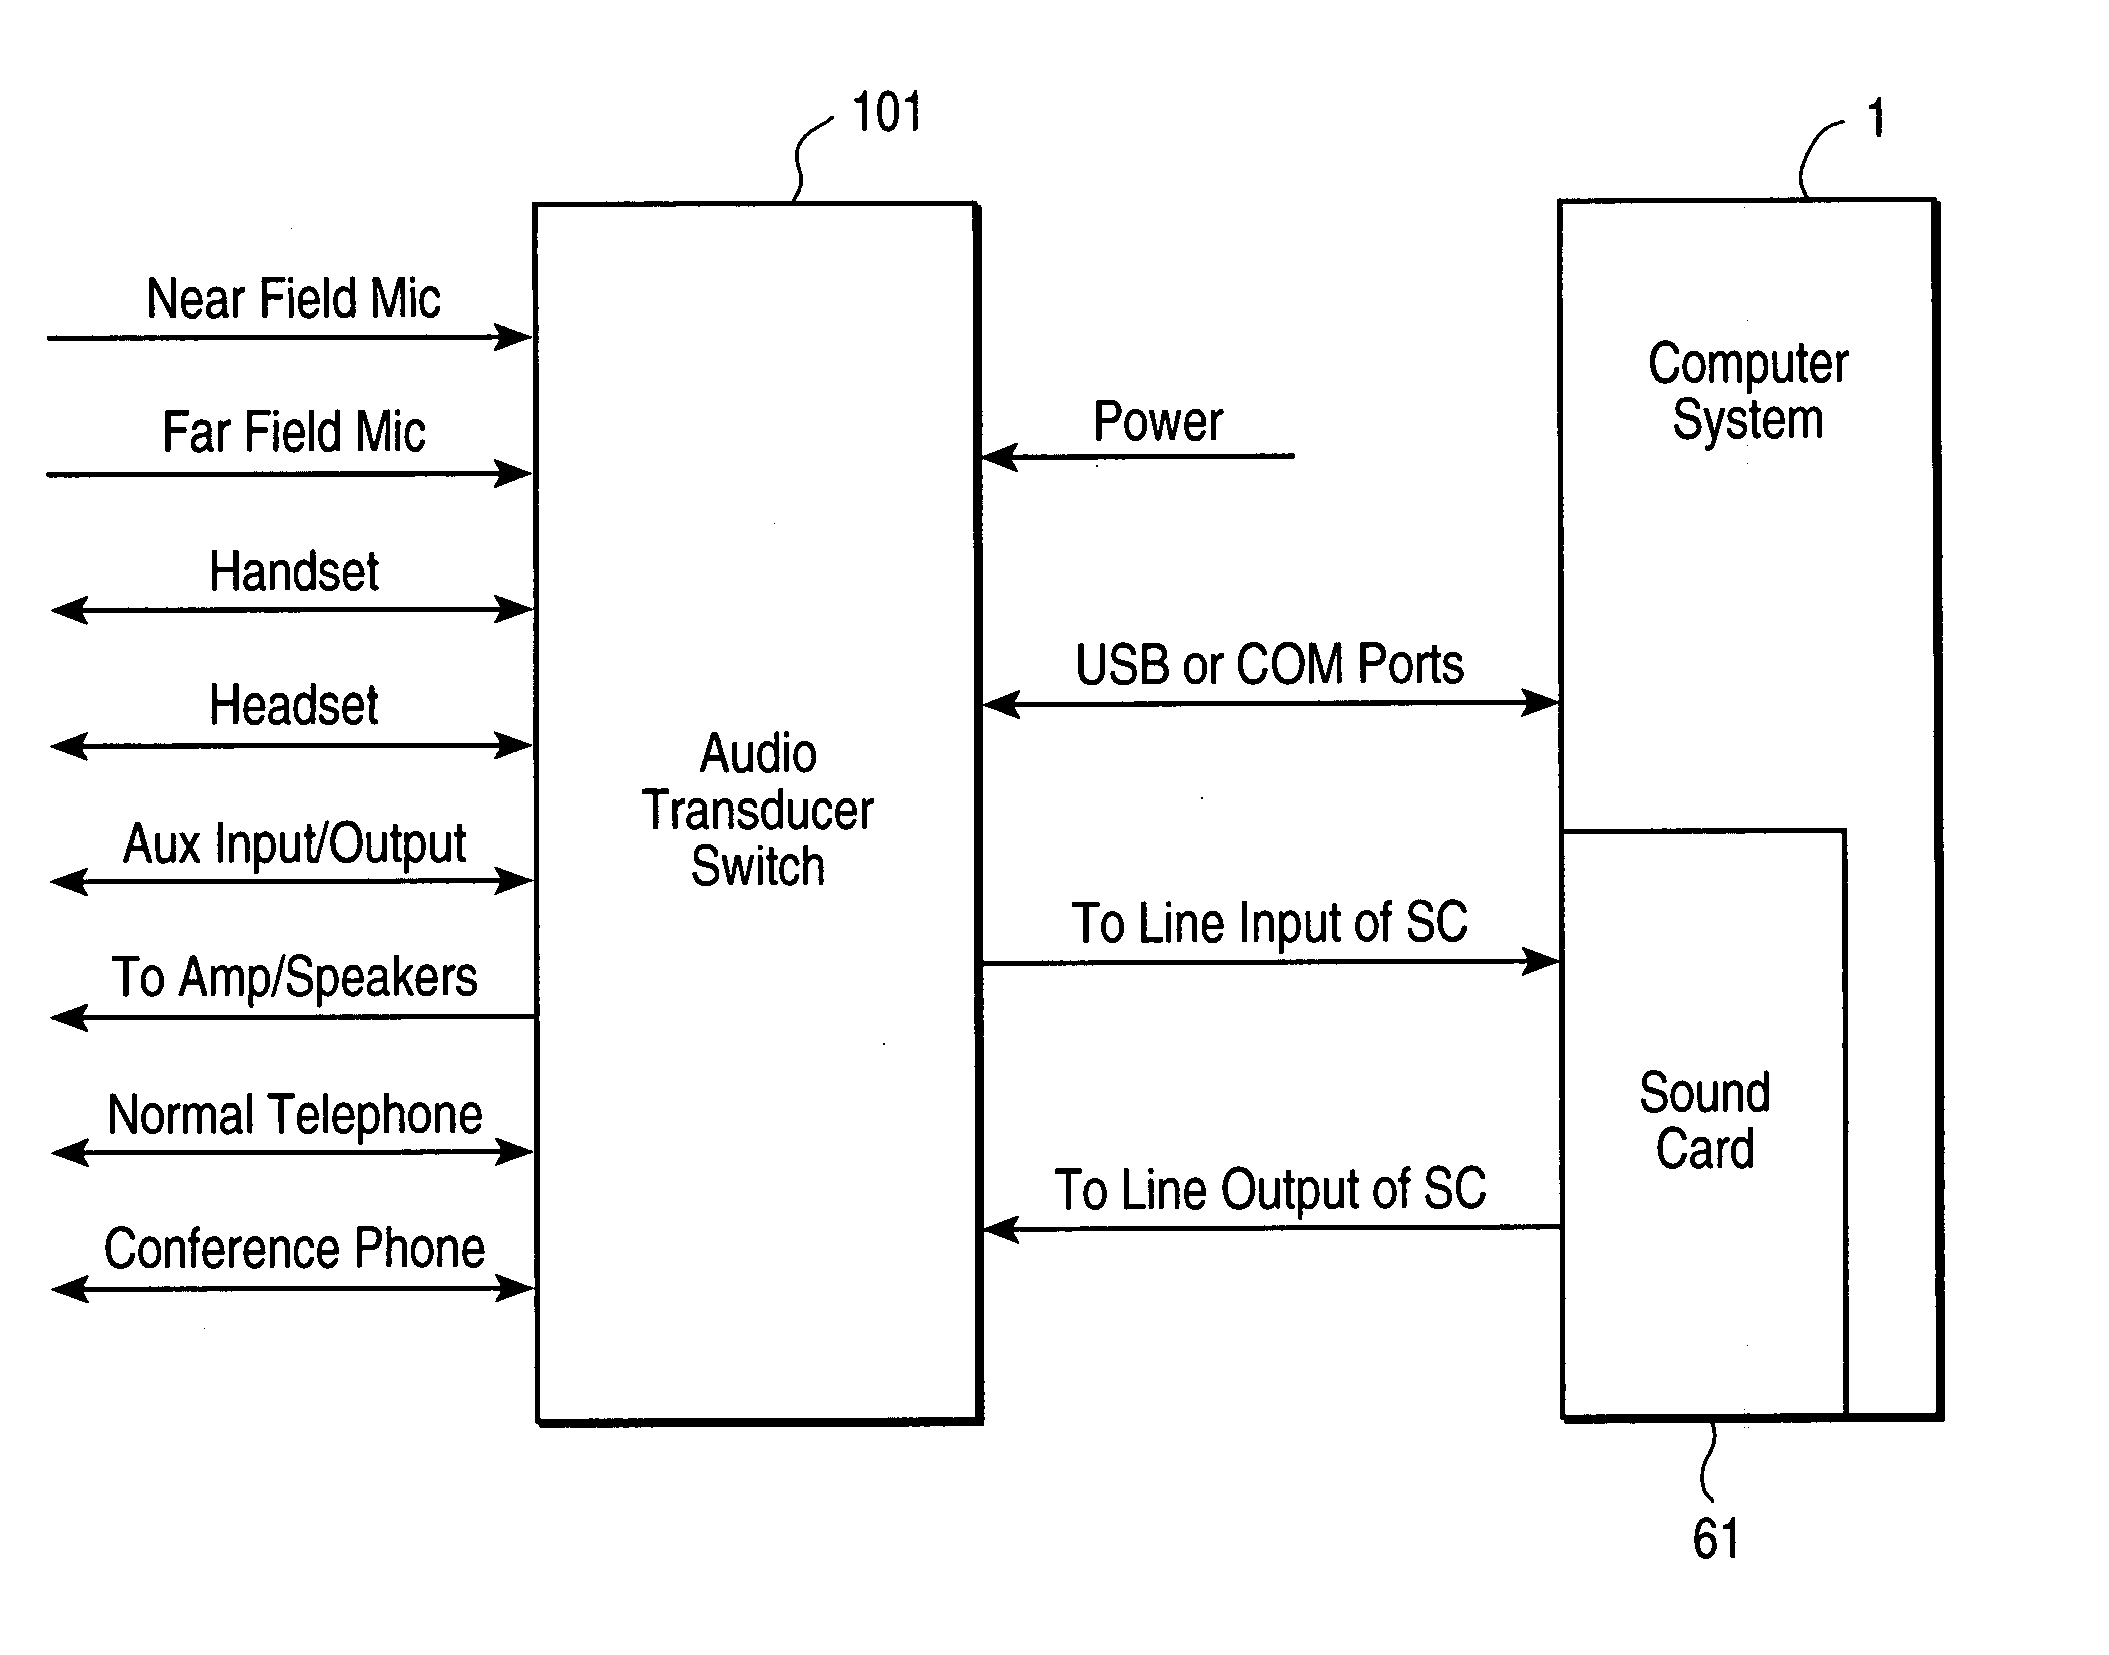 Techniques for audio transducer switching under programmatic and off hook interrupt control